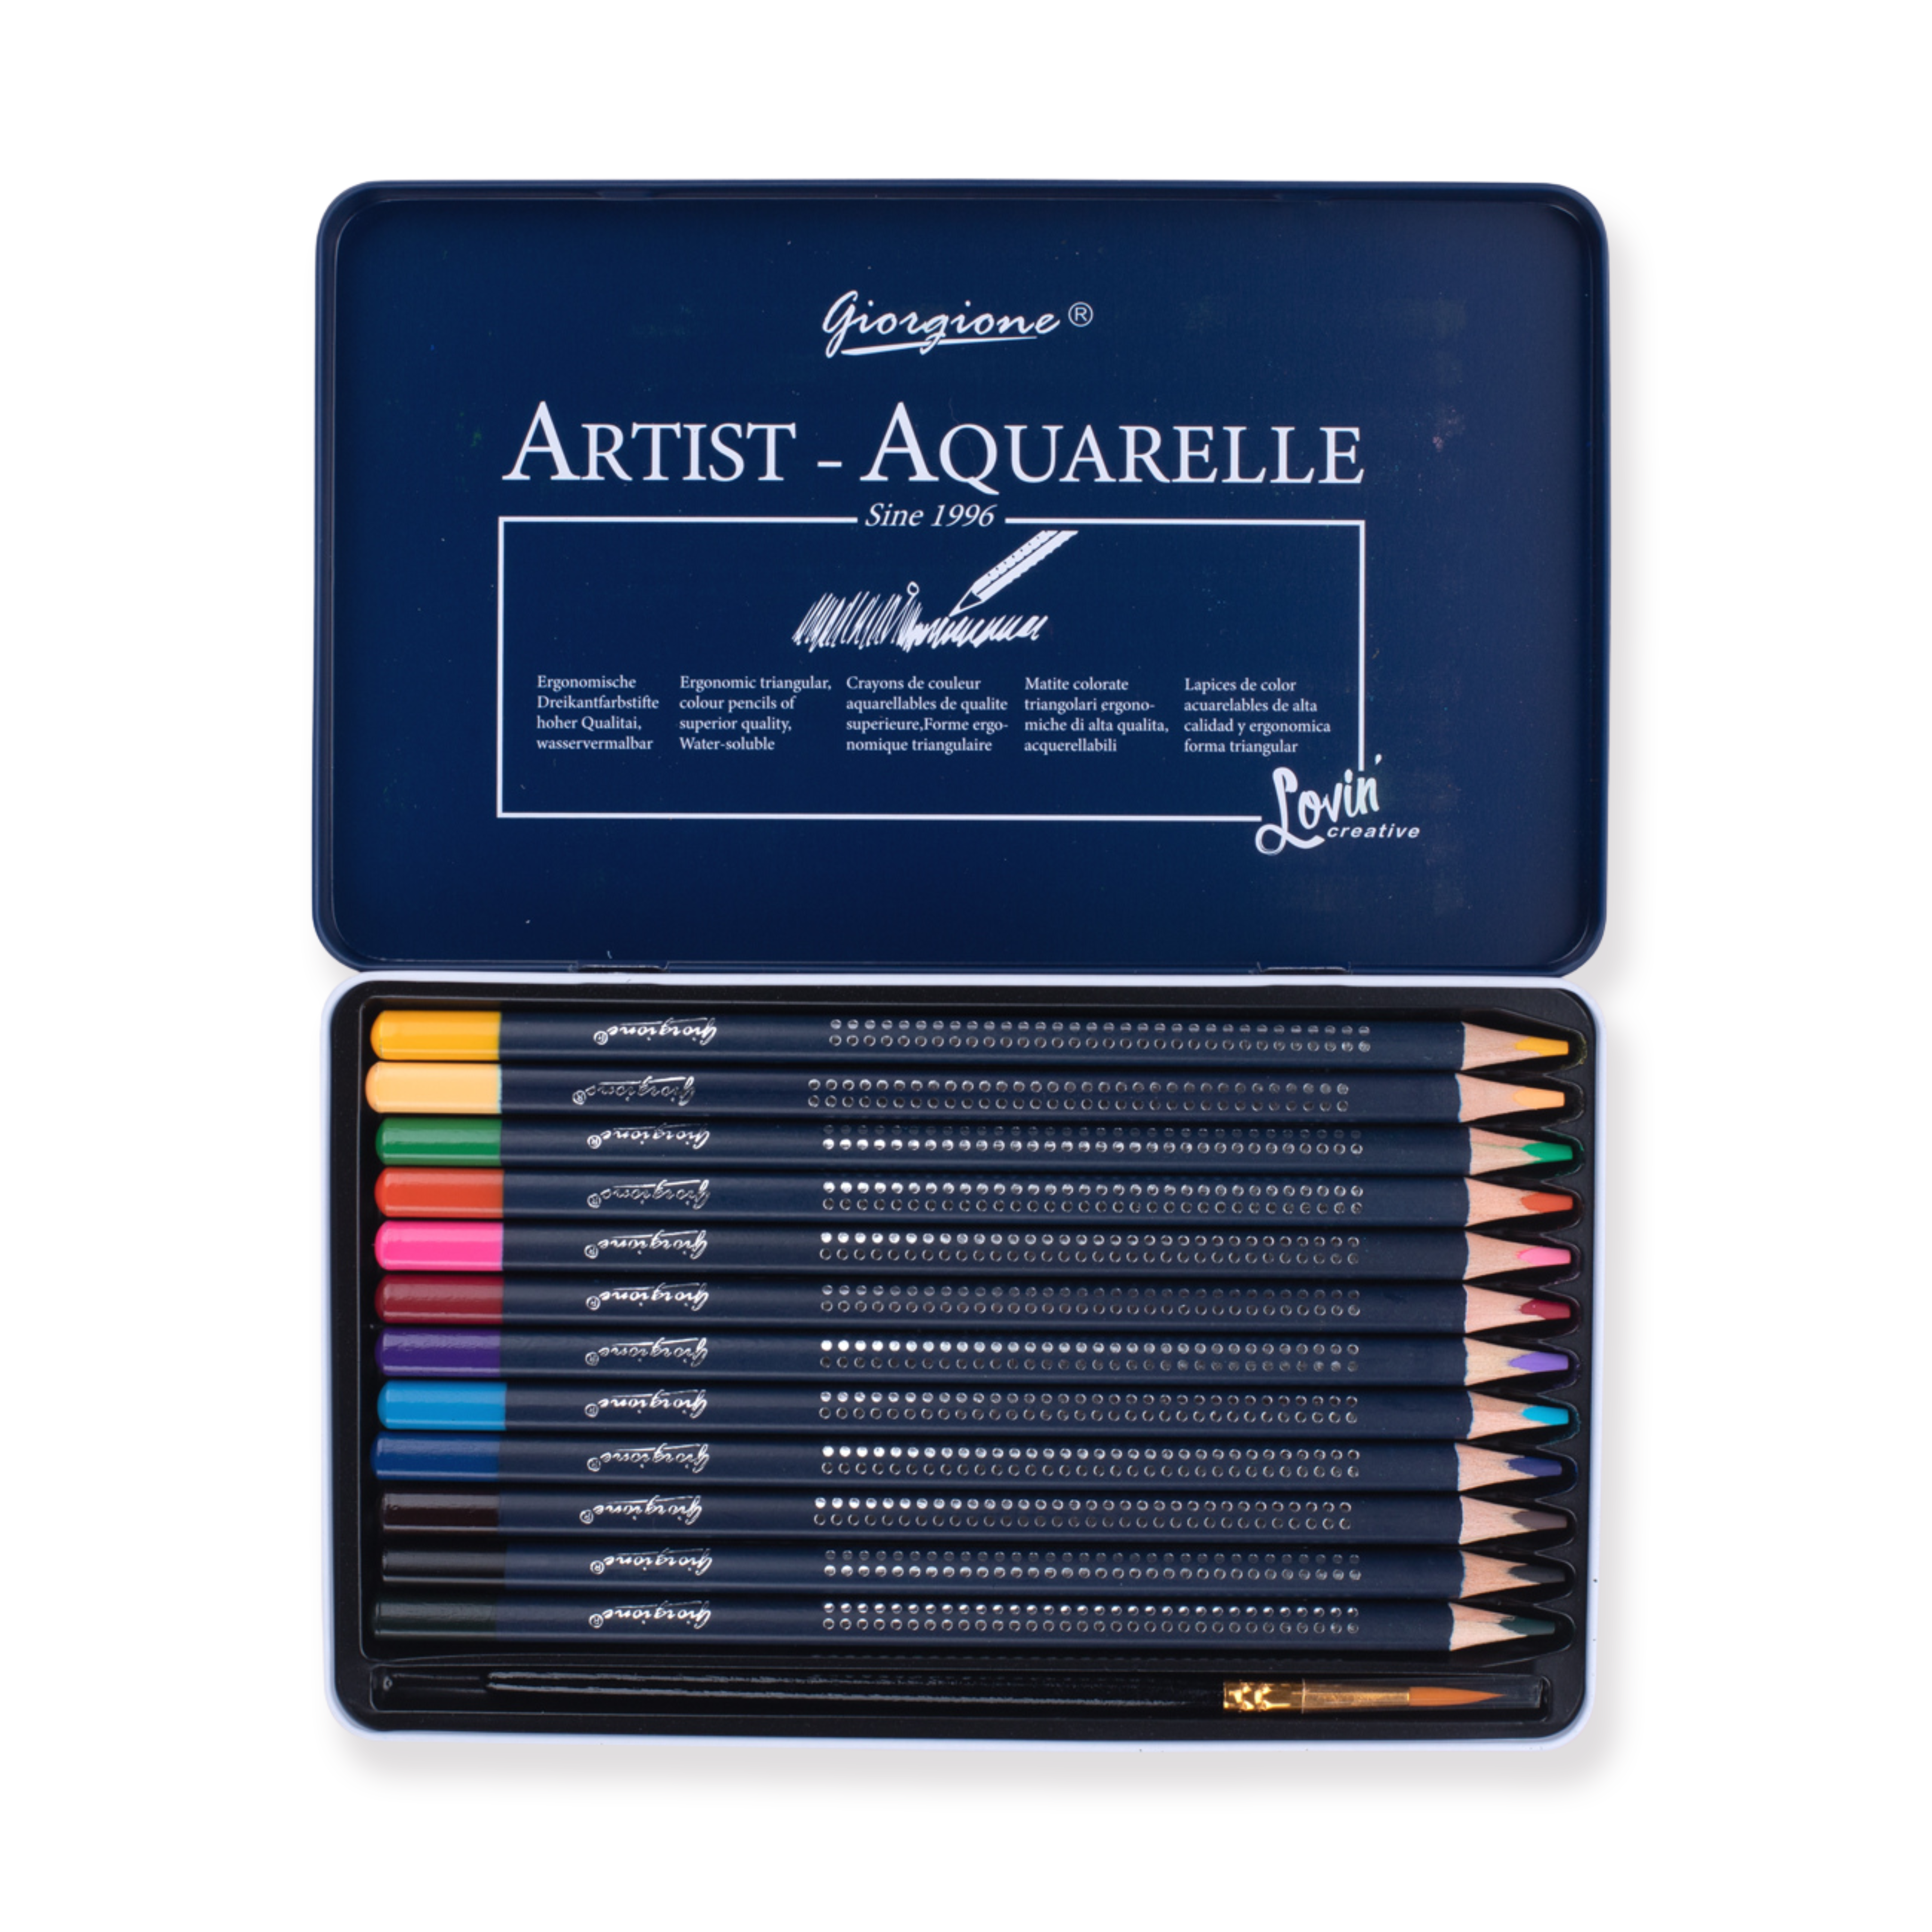 Giorgione Water-soluble Colored Pencils - Set of 12 - Stationery Pal